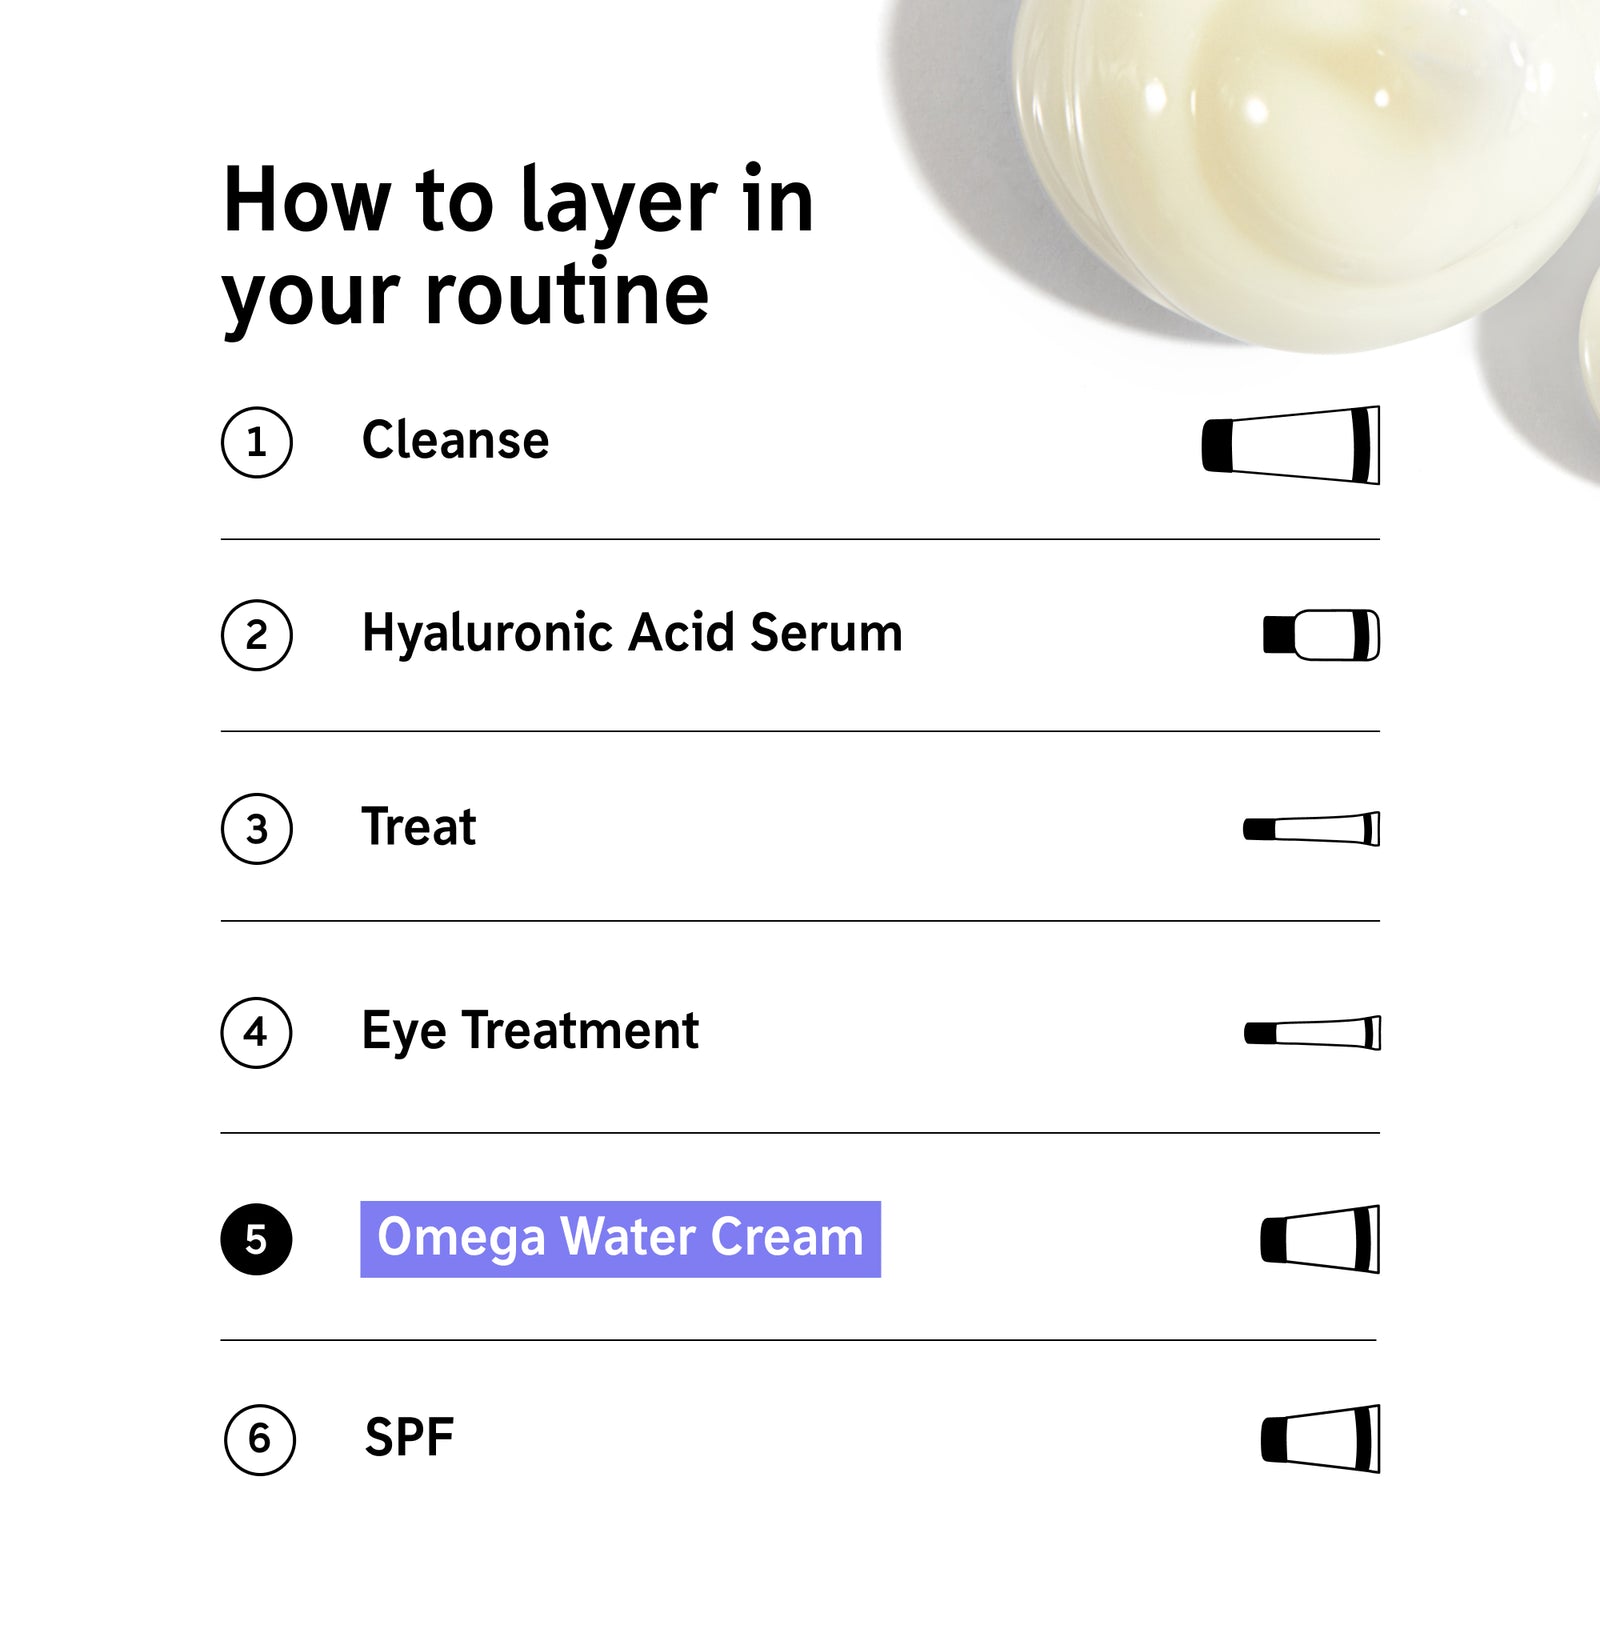 How to layer Omega Water Cream in your routine